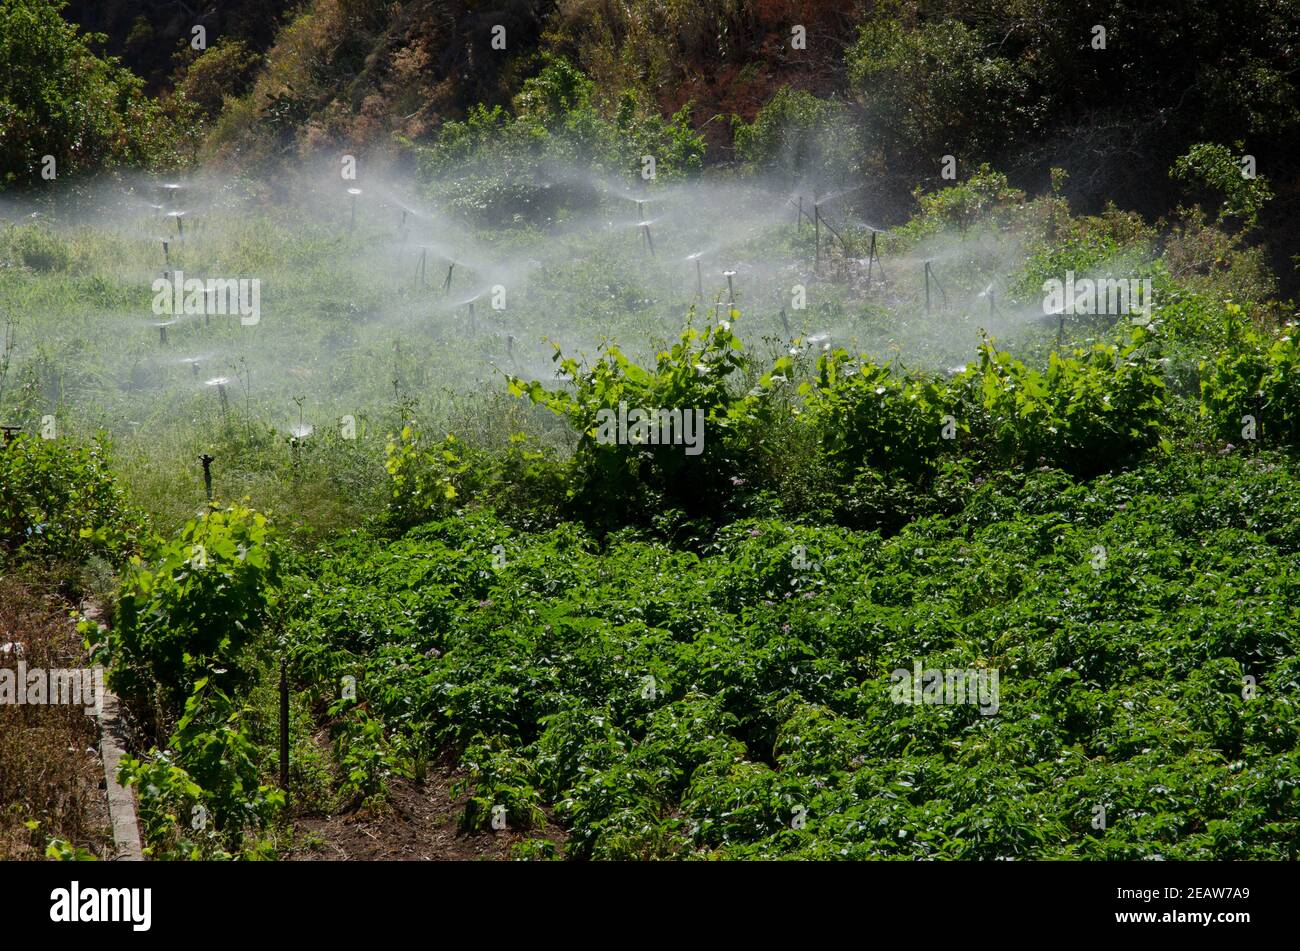 Irrigation of a potatoes cultivation in Agulo. Stock Photo